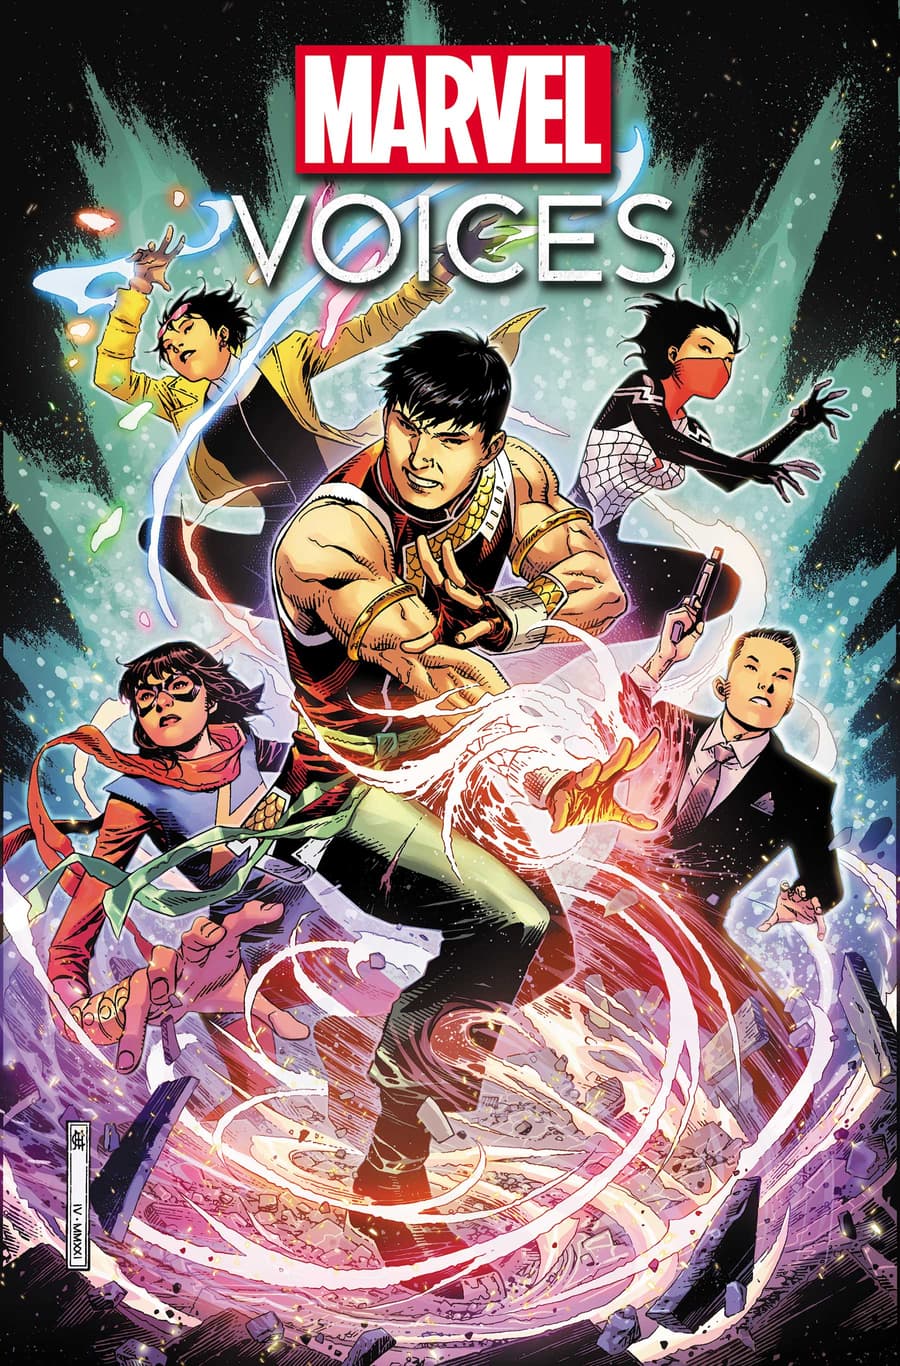 MARVEL'S VOICES: IDENTITY #1 cover by Jim Cheung